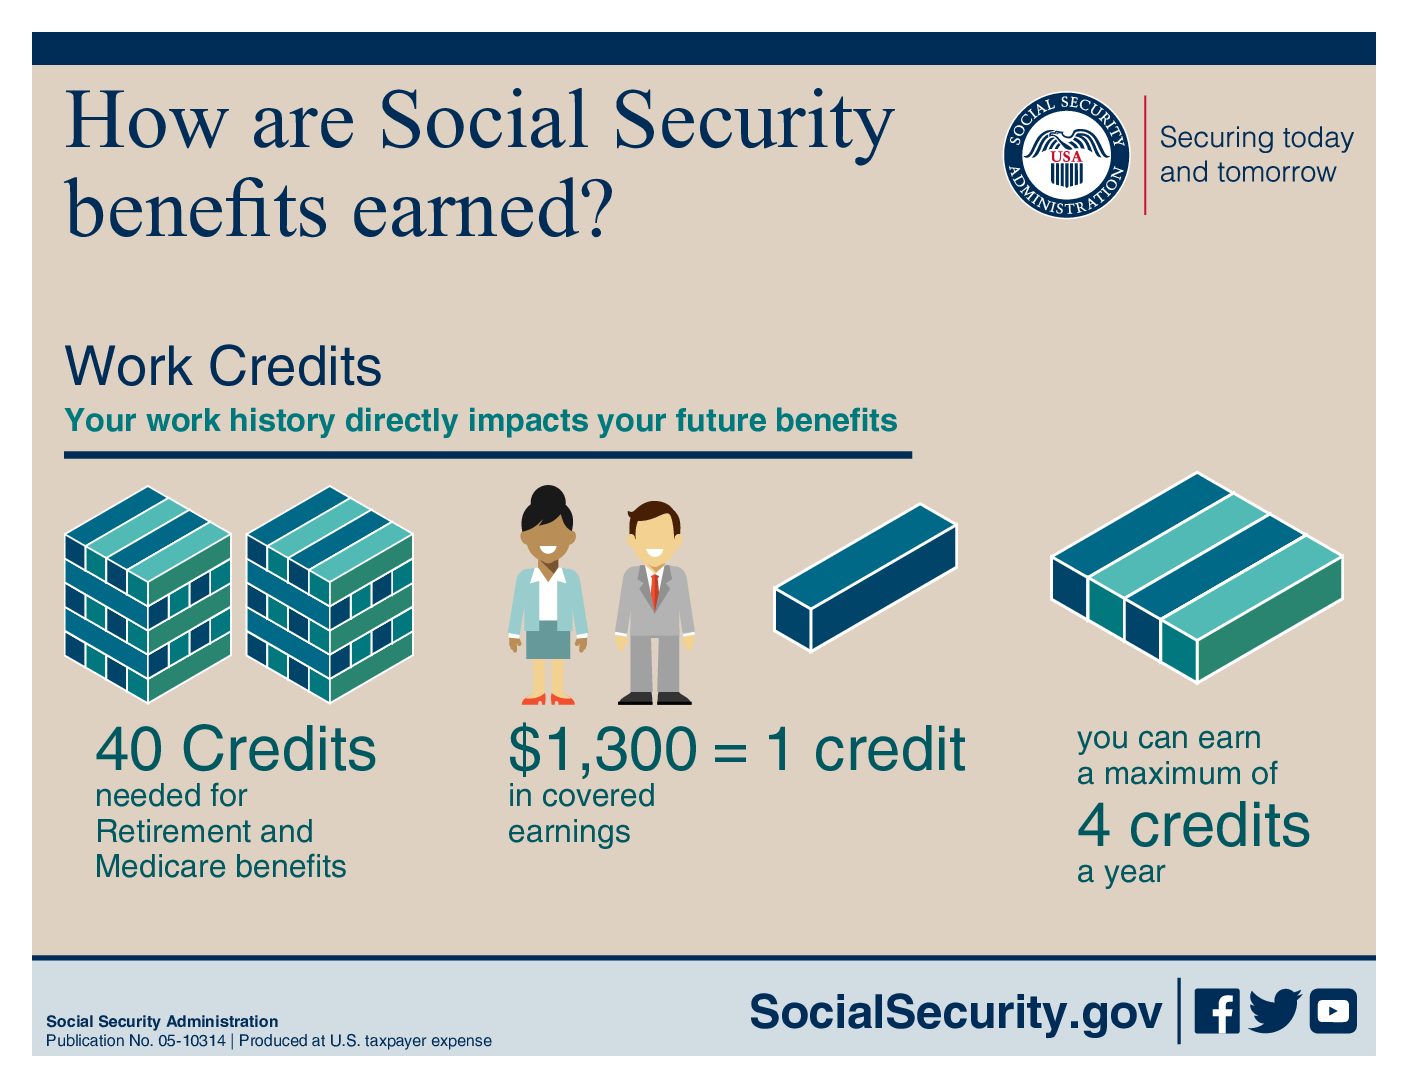 minimum social security benefit for 10 years of work